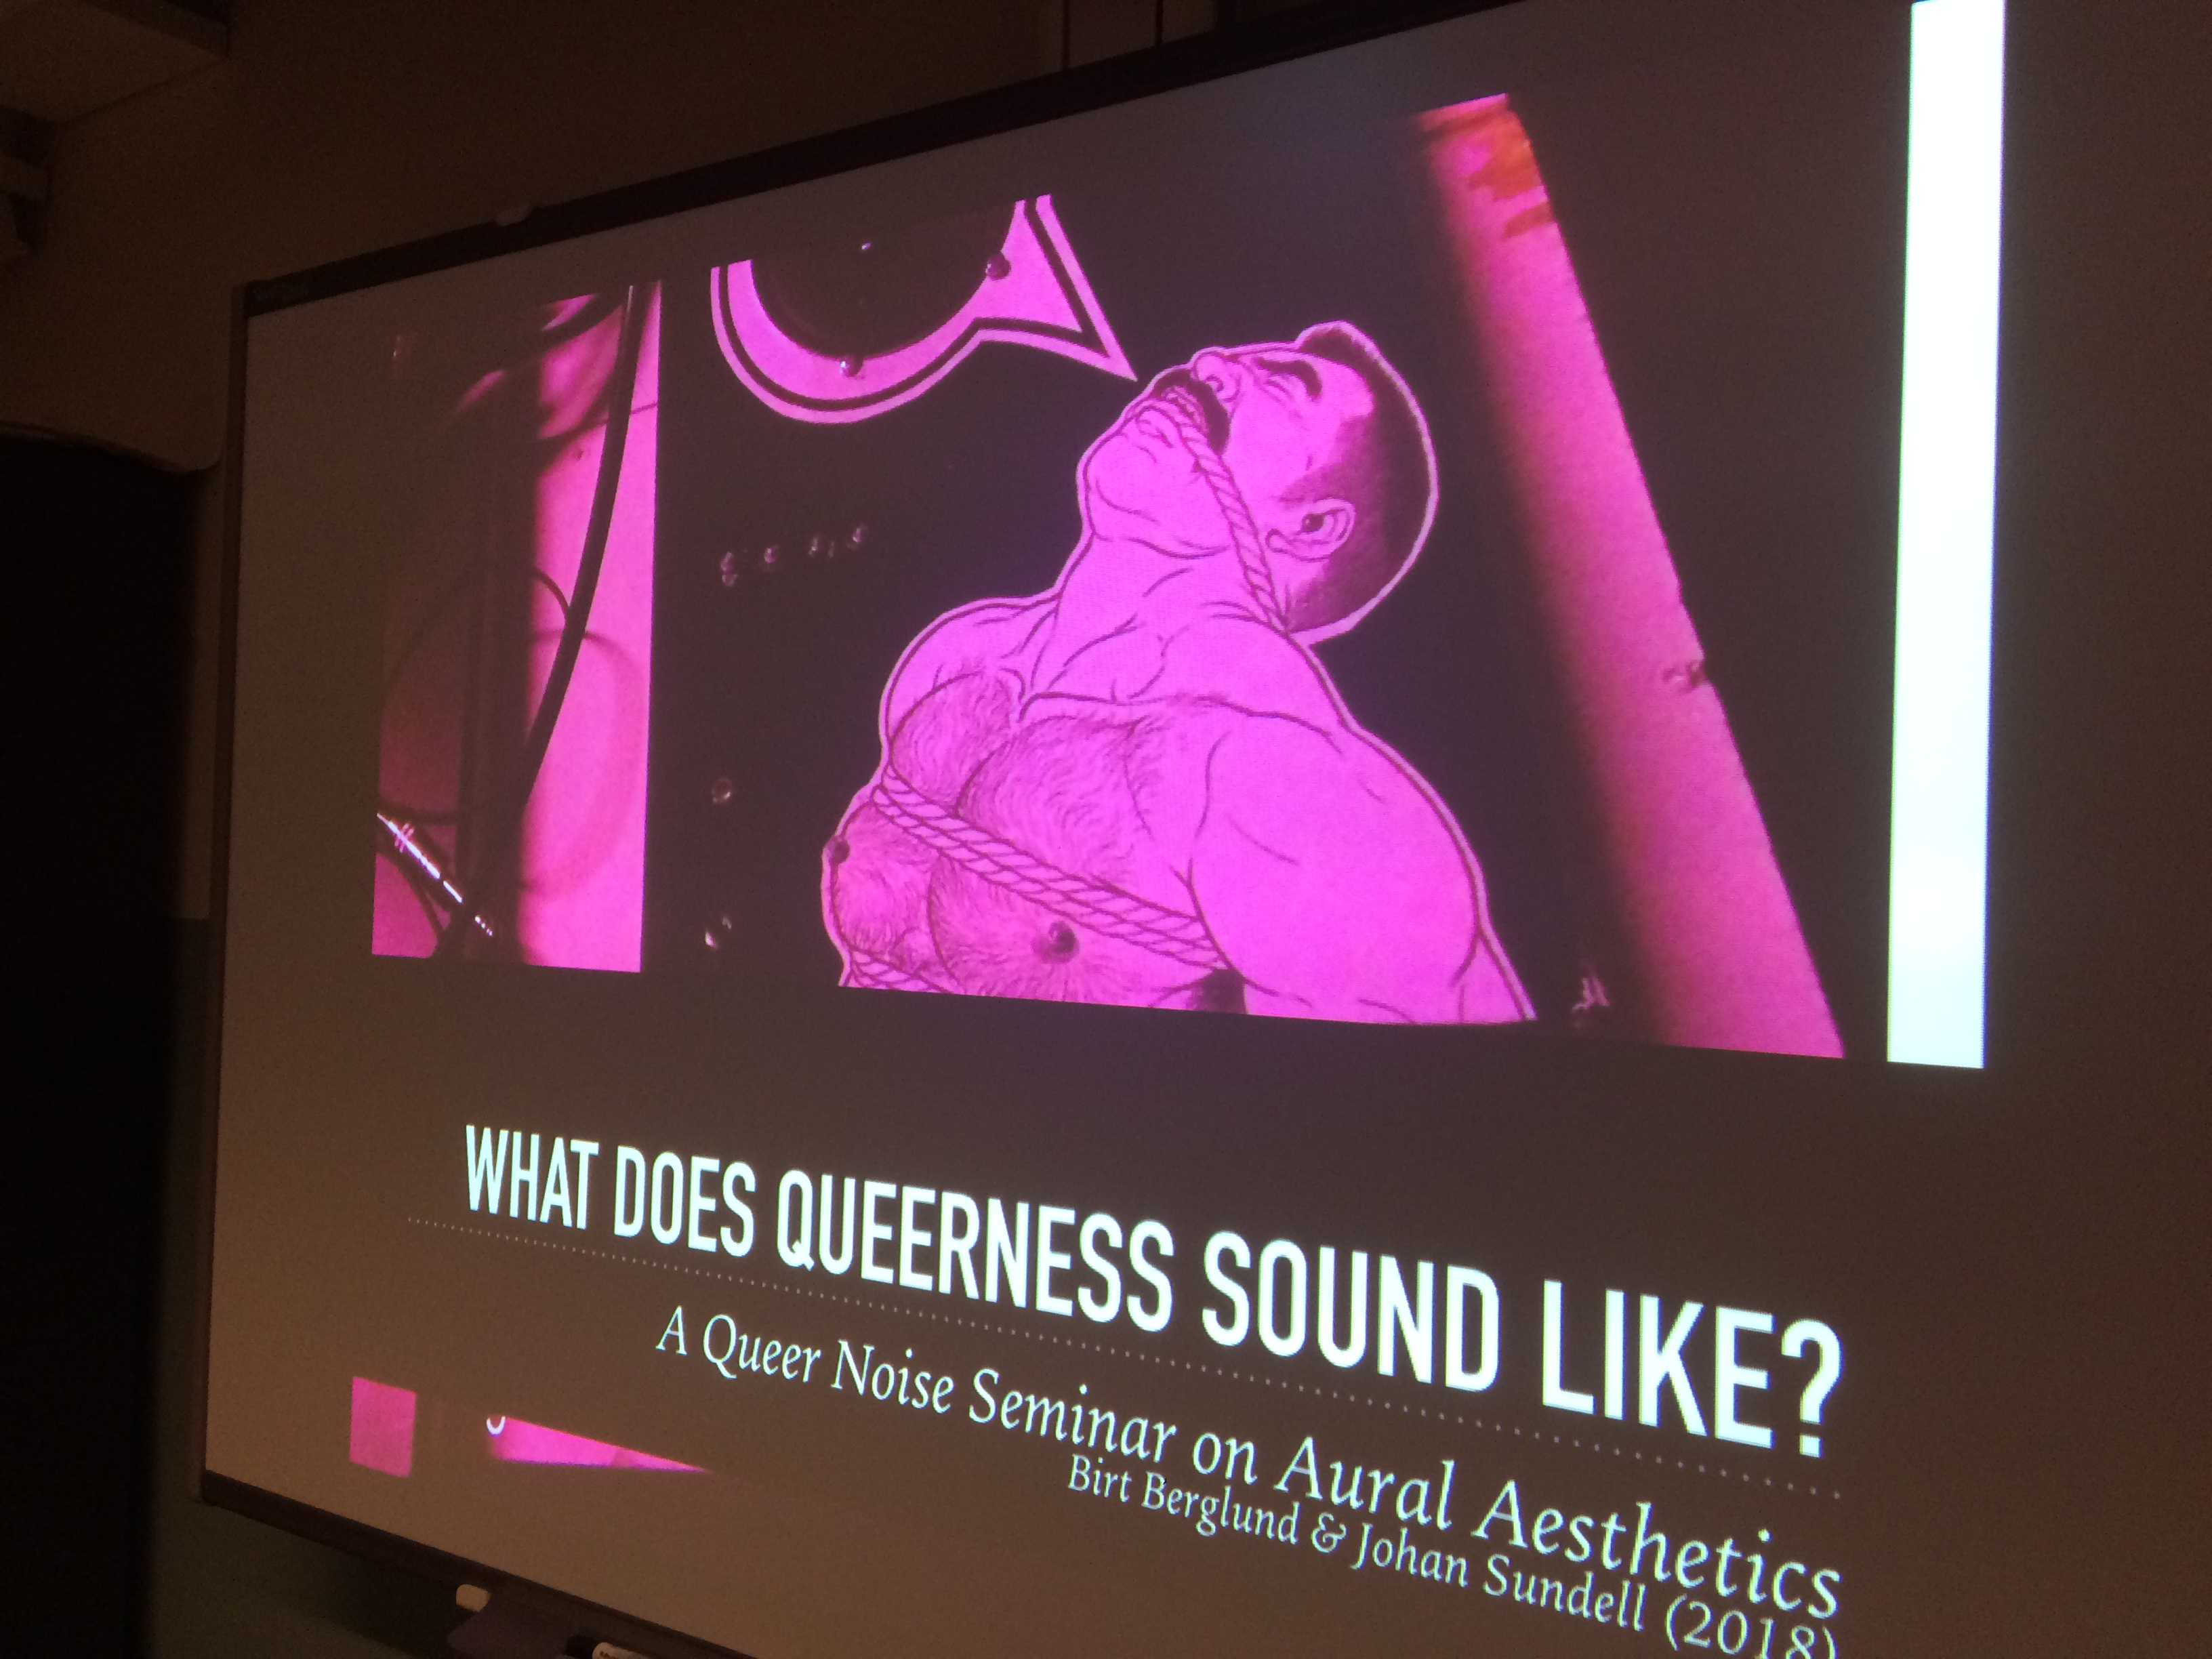 What does queerness sound like?